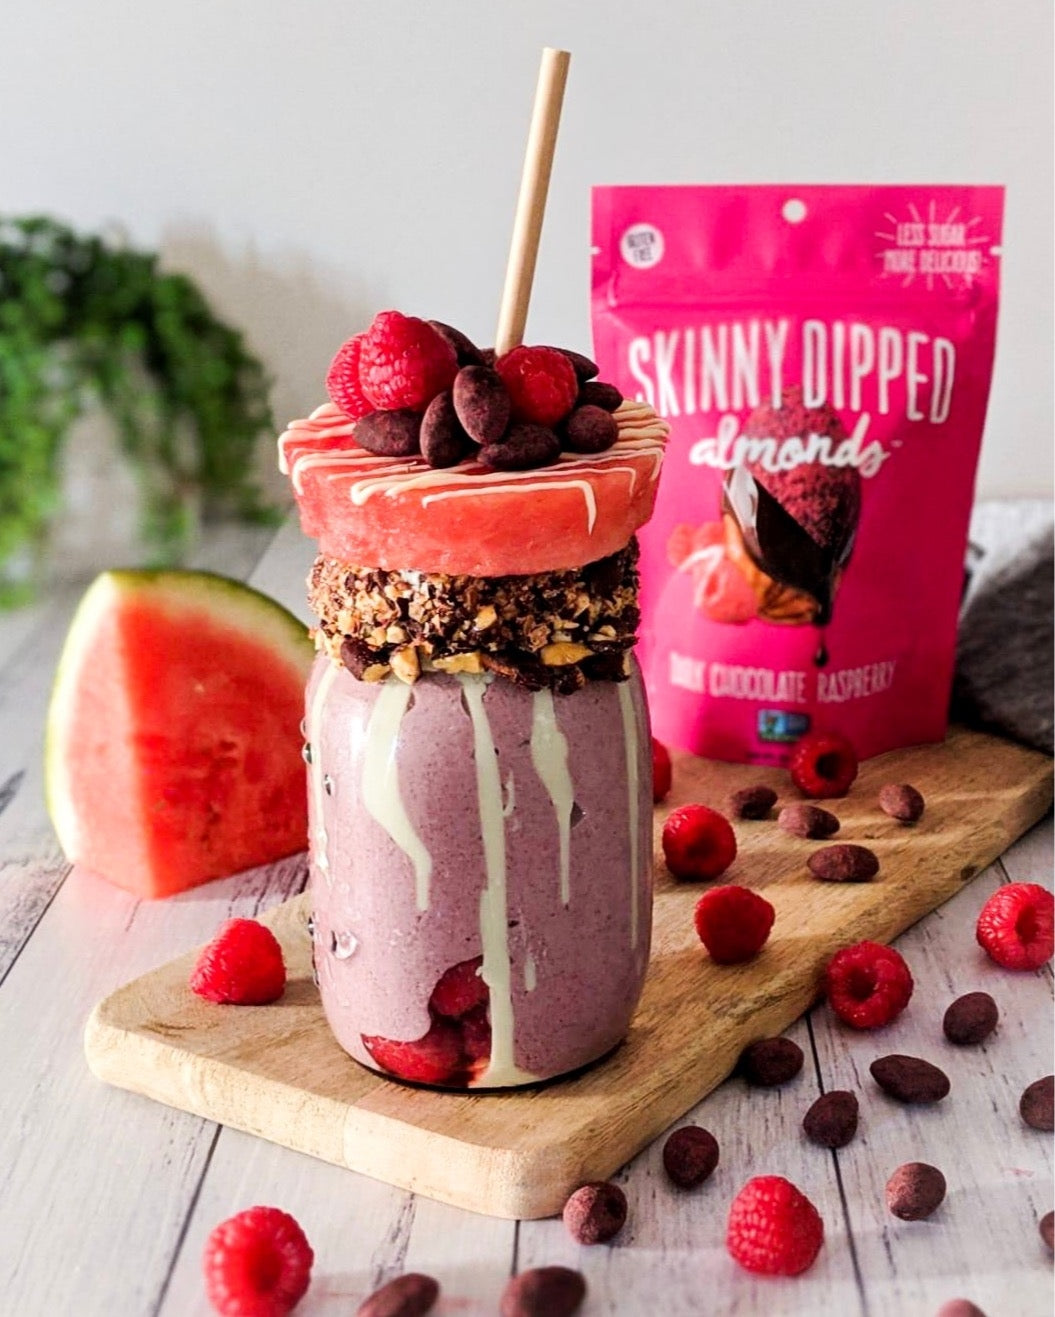 Skinny Dipped Super Smoothie